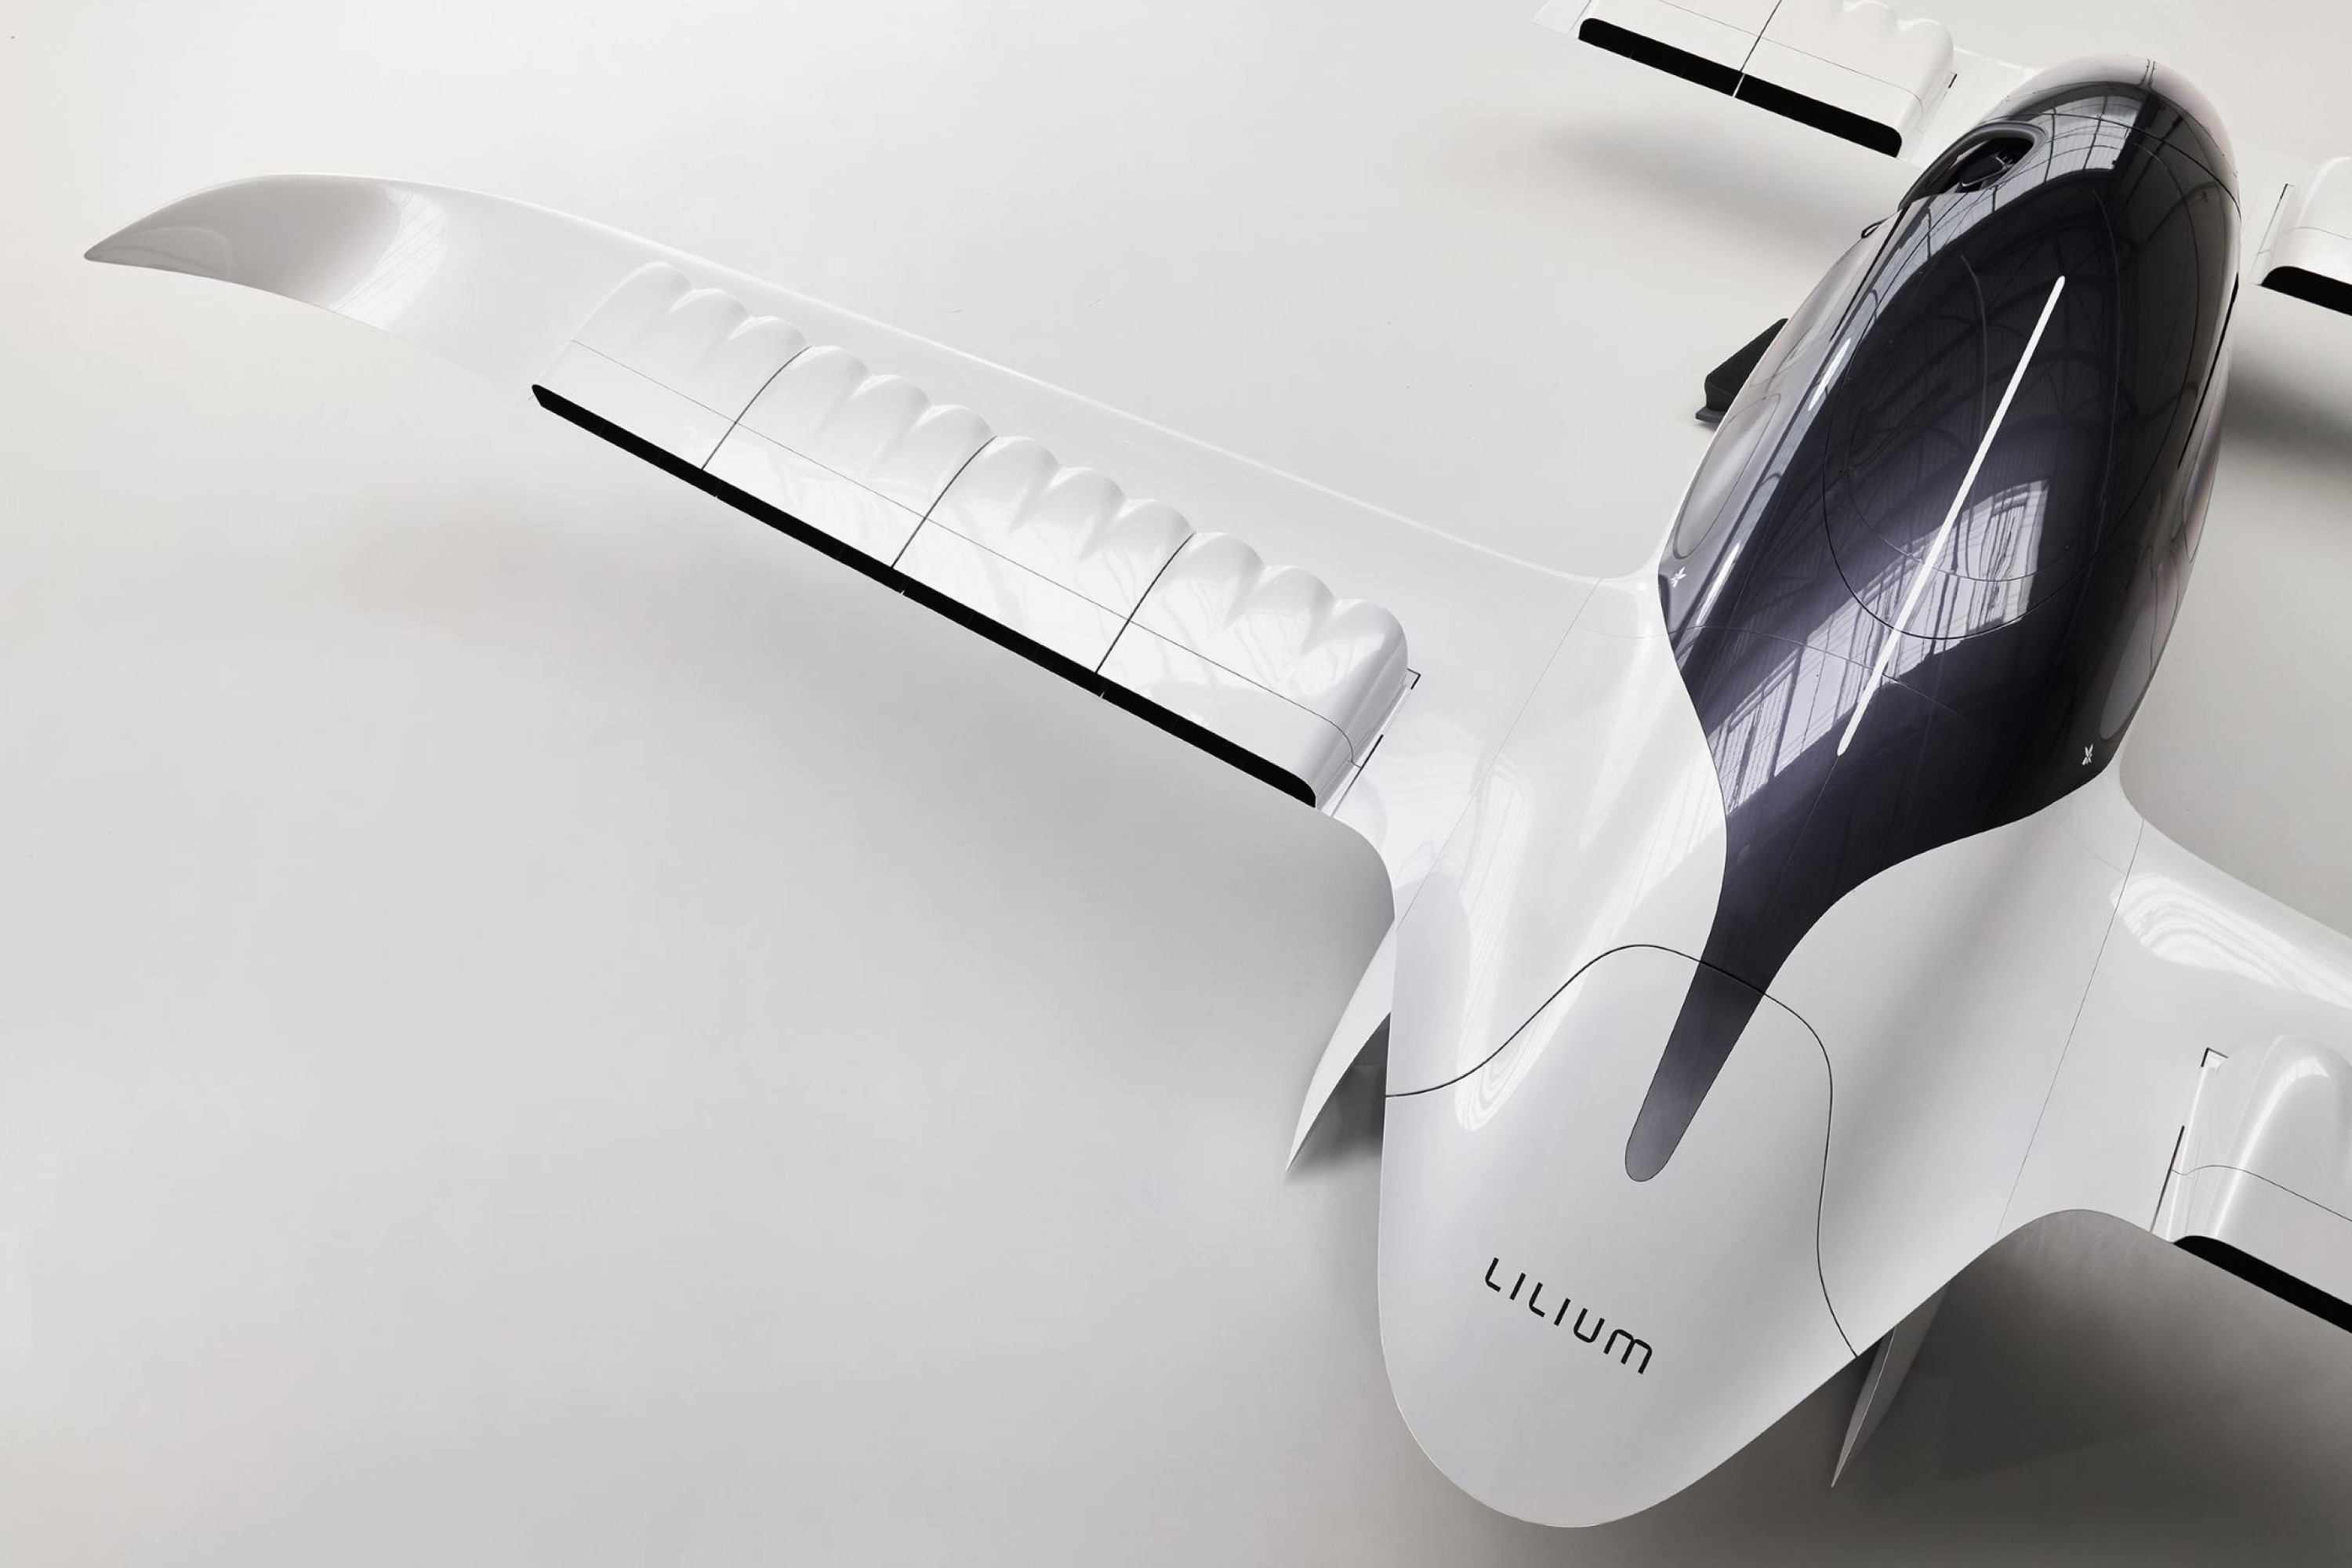 Lilium Announces Successful Closing of $119 Million Capital Raise to Fund Continued Development of New Electric Aircraft